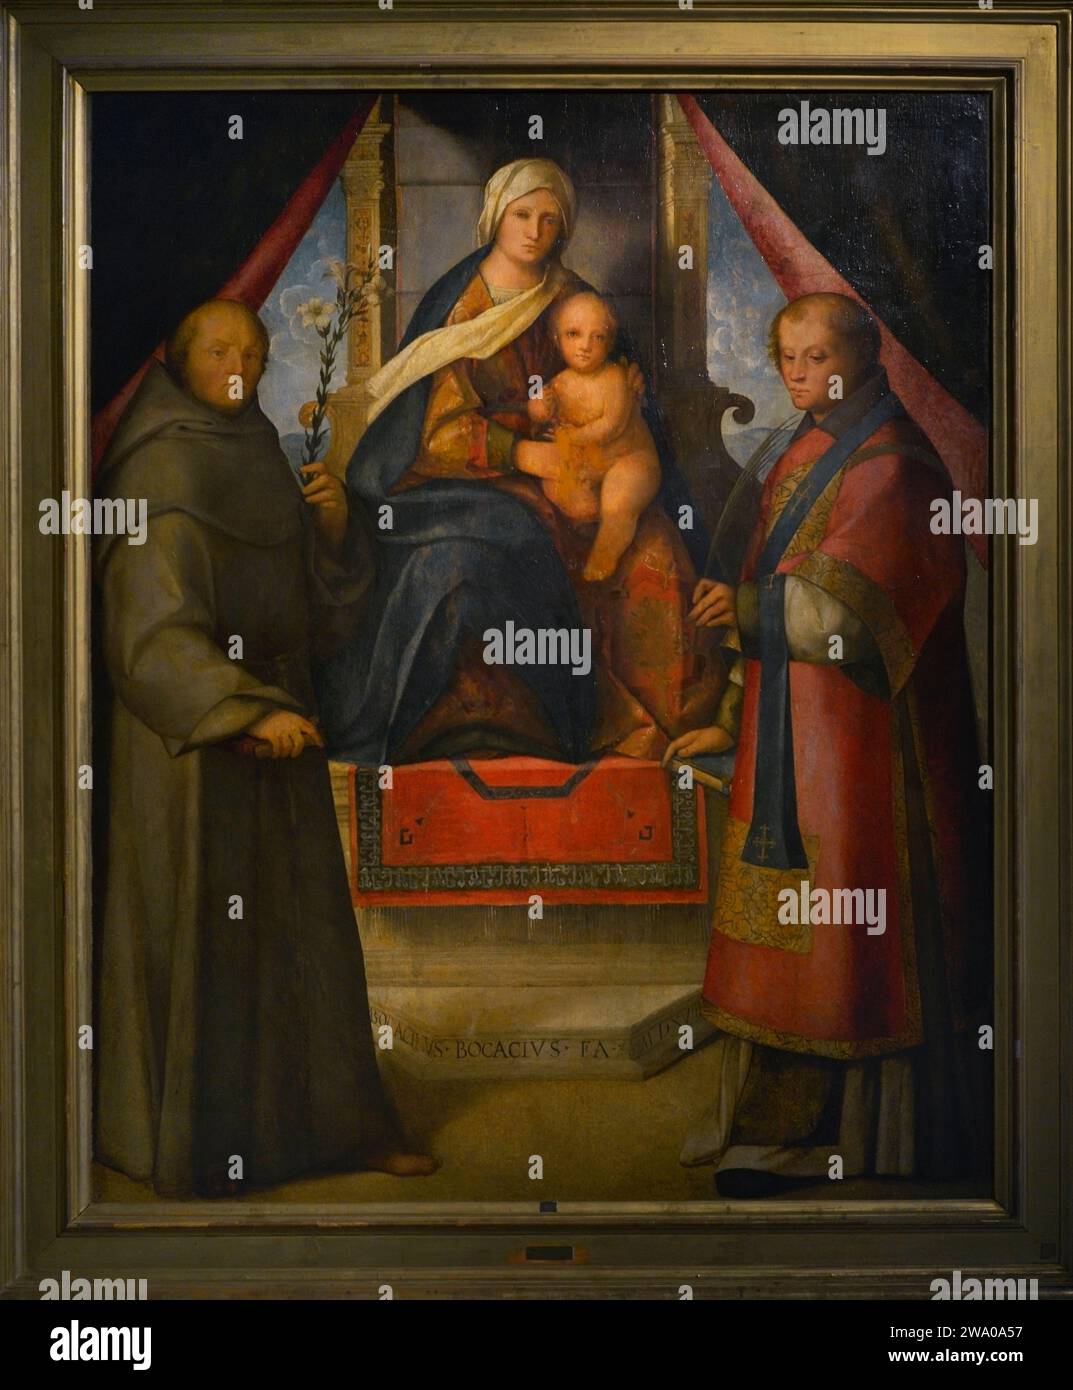 Boccaccio Boccaccino (c. 1466-1525). Italian painter. The Virgin and Child Enthroned between Saint Vincent and Saint Anthony of Padua, 1518. Tempera (panel transferred to canvas). From the church of San Vincenzo, Cremona. Museo Civico Ala Ponzone. Cremona. Italy. Stock Photo